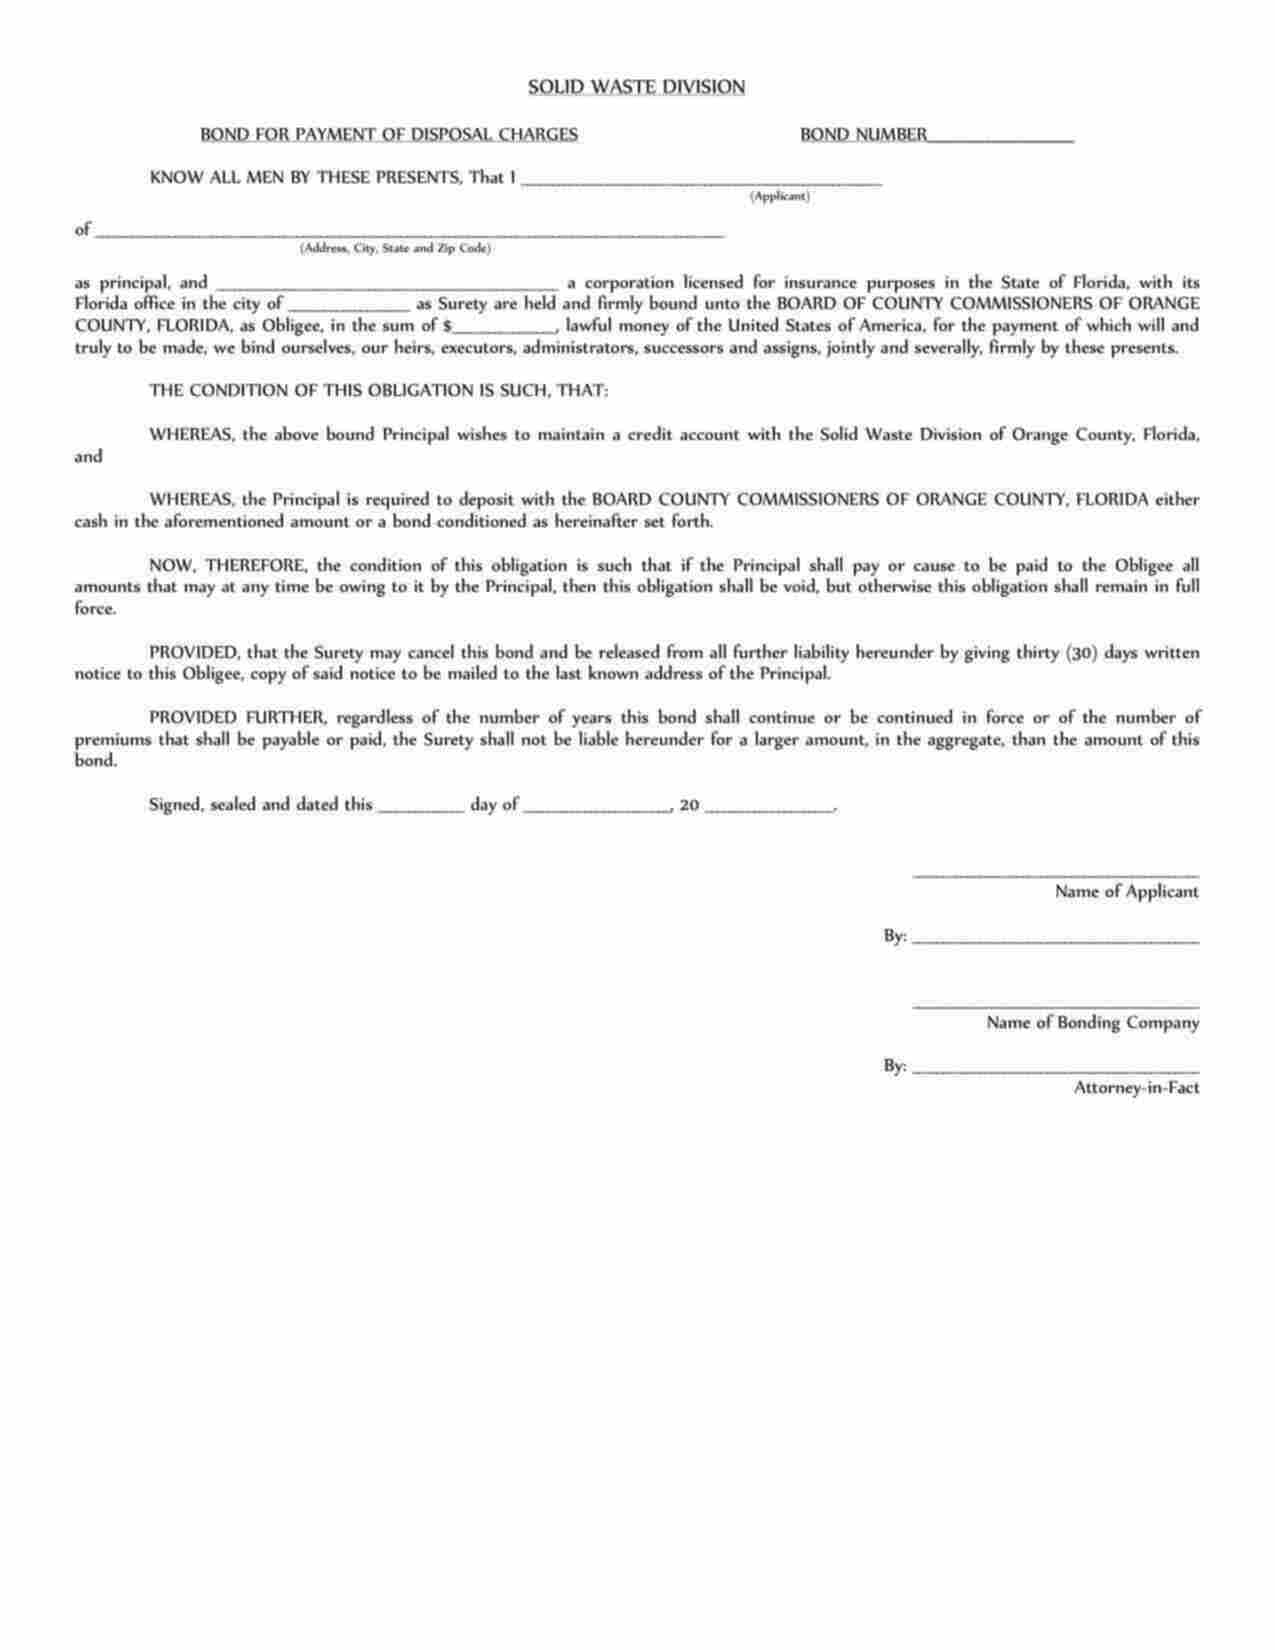 Florida Payment of Disposal Charges Bond Form